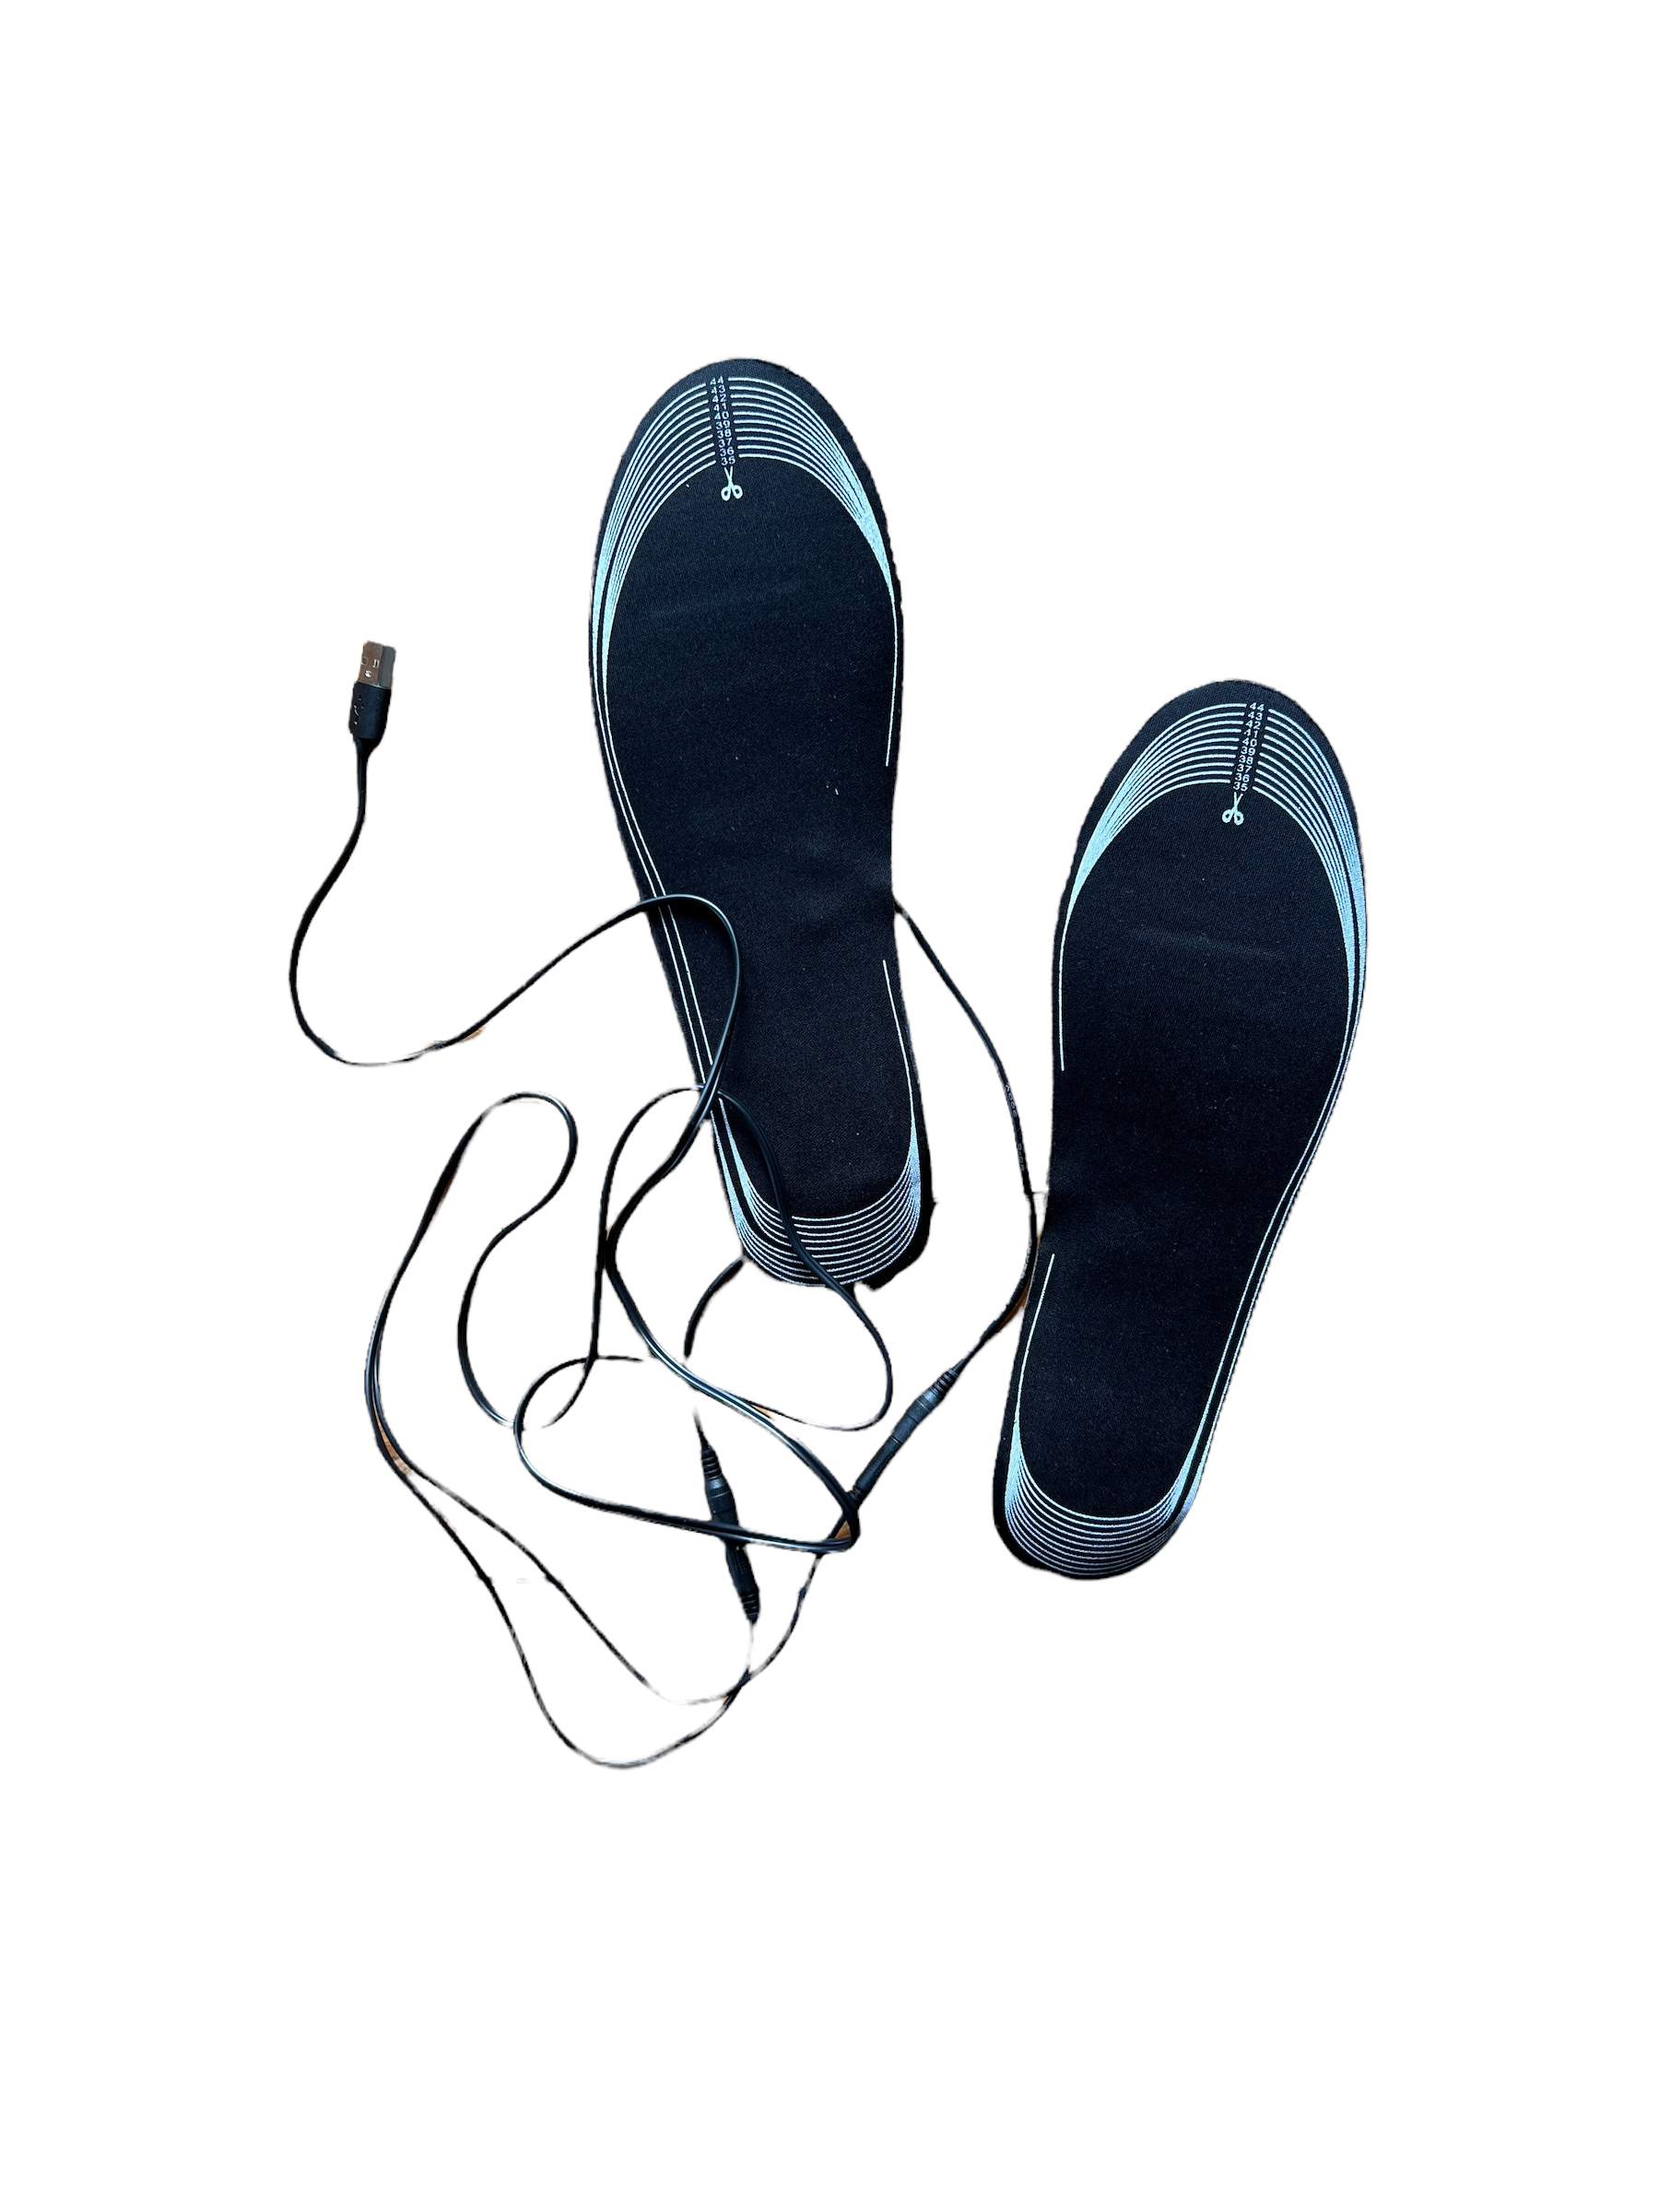 USB Heated Shoe Insoles Mobility & Accessibility SPIRIT SPARKPLUGS   